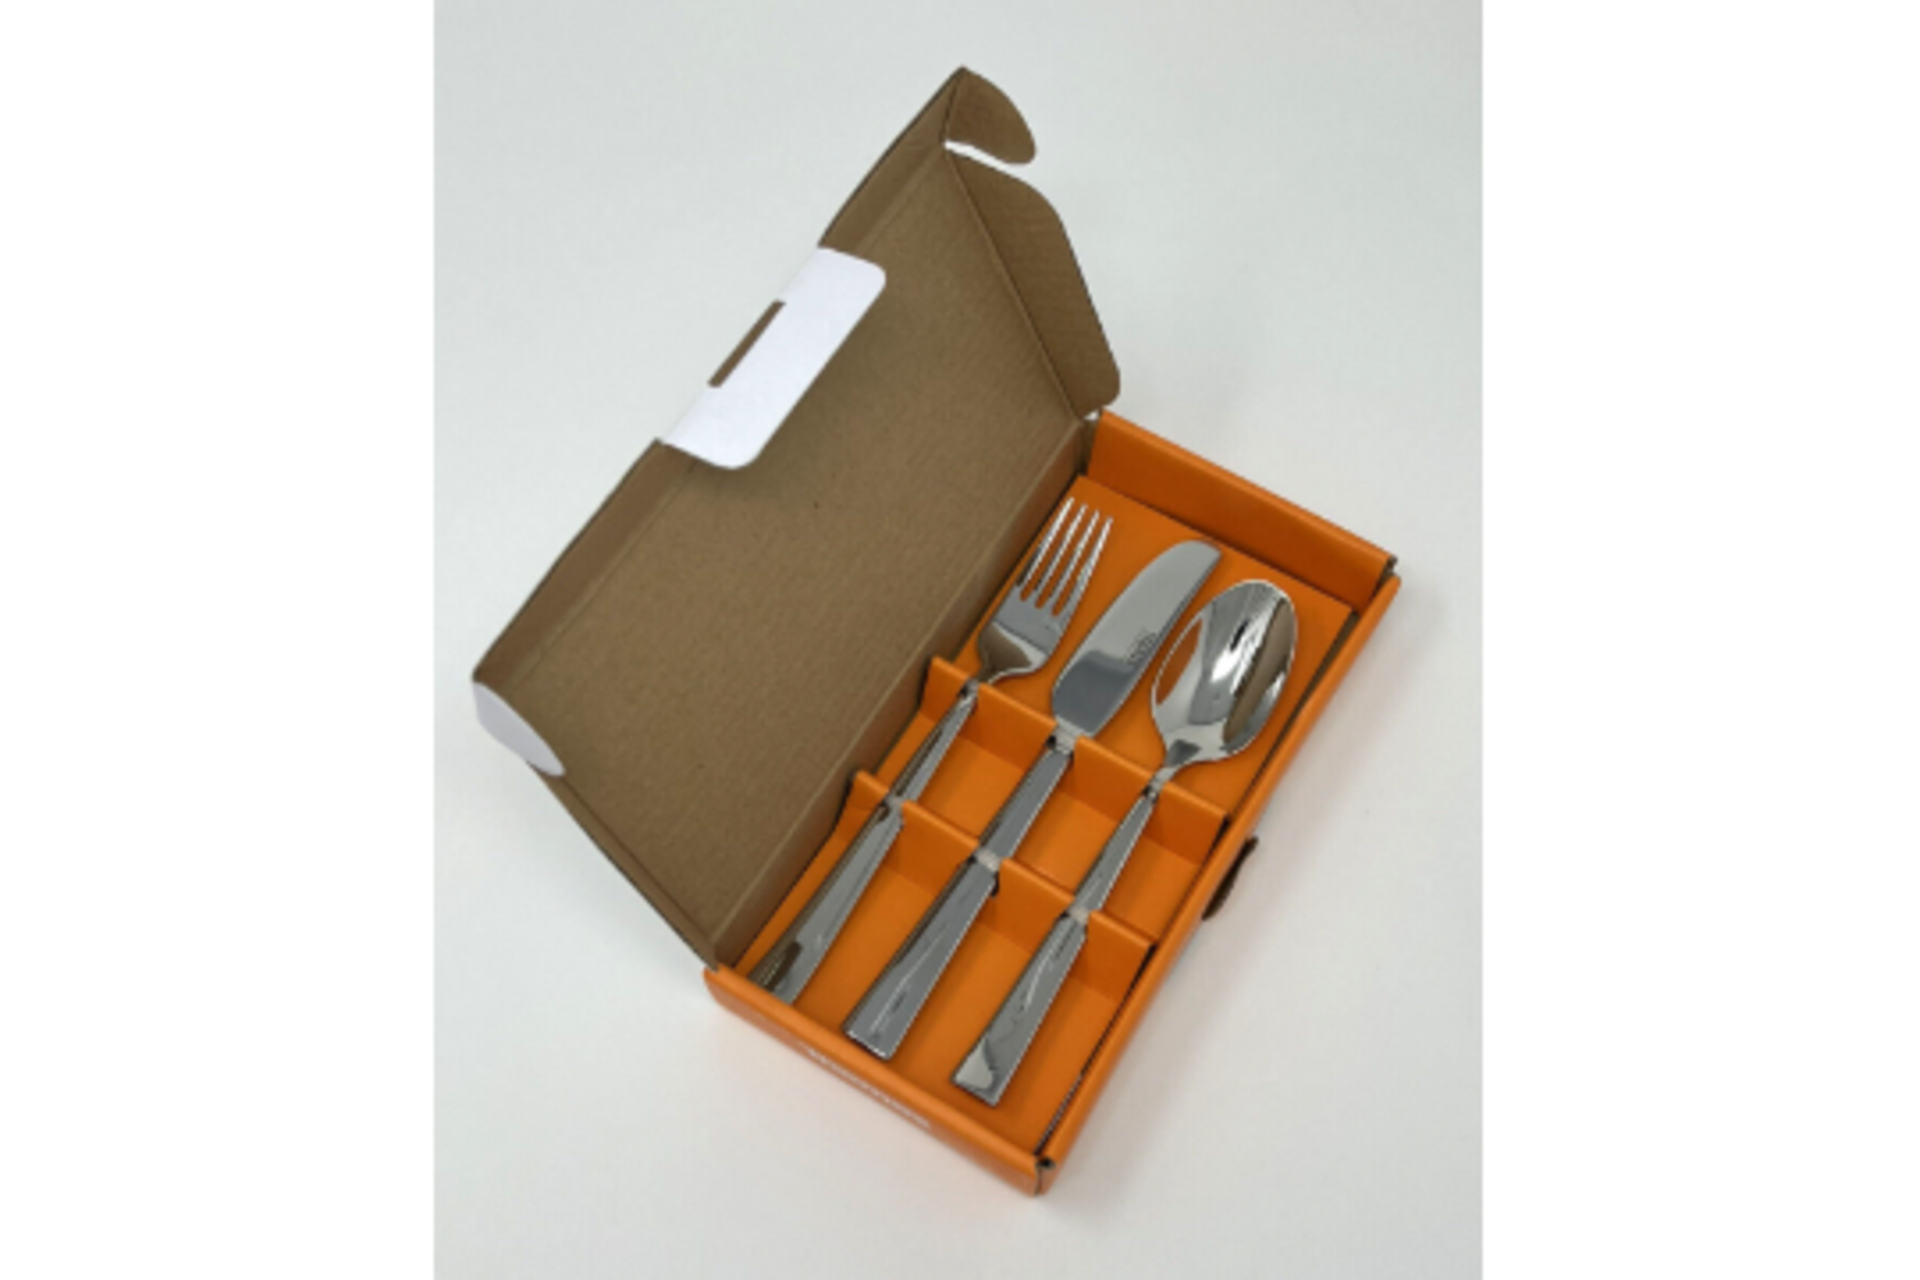 PALLET TO CONTAIN 480 x New Boxed Sets of 3 Thomas Children’s Cutlery Set Stainless Steel Easy - Image 2 of 8